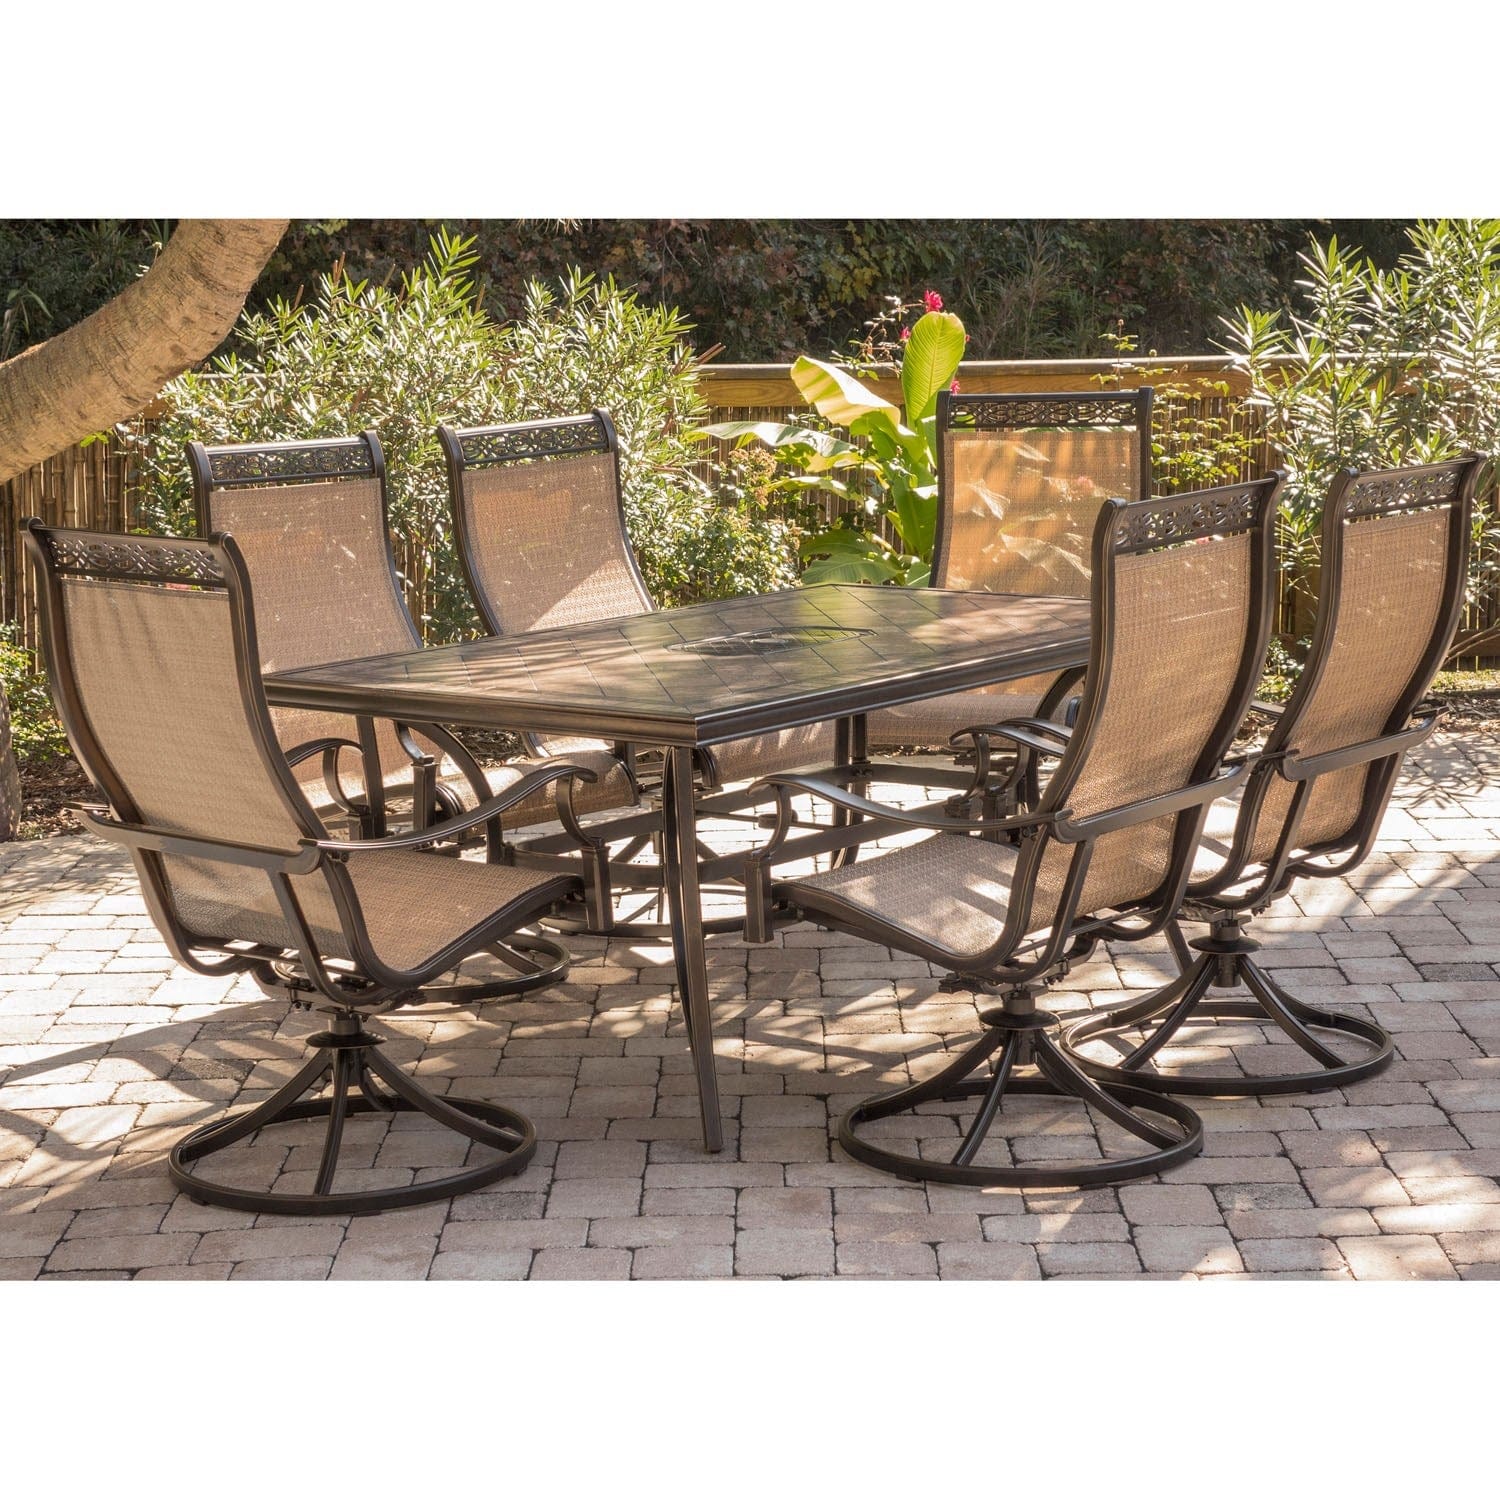 Hanover Outdoor Dining Set Hanover Monaco 7-Piece Dining Set with Six Swivel Rockers and a 68 x 40 in. Dining Table | MONDN7PCSW-6